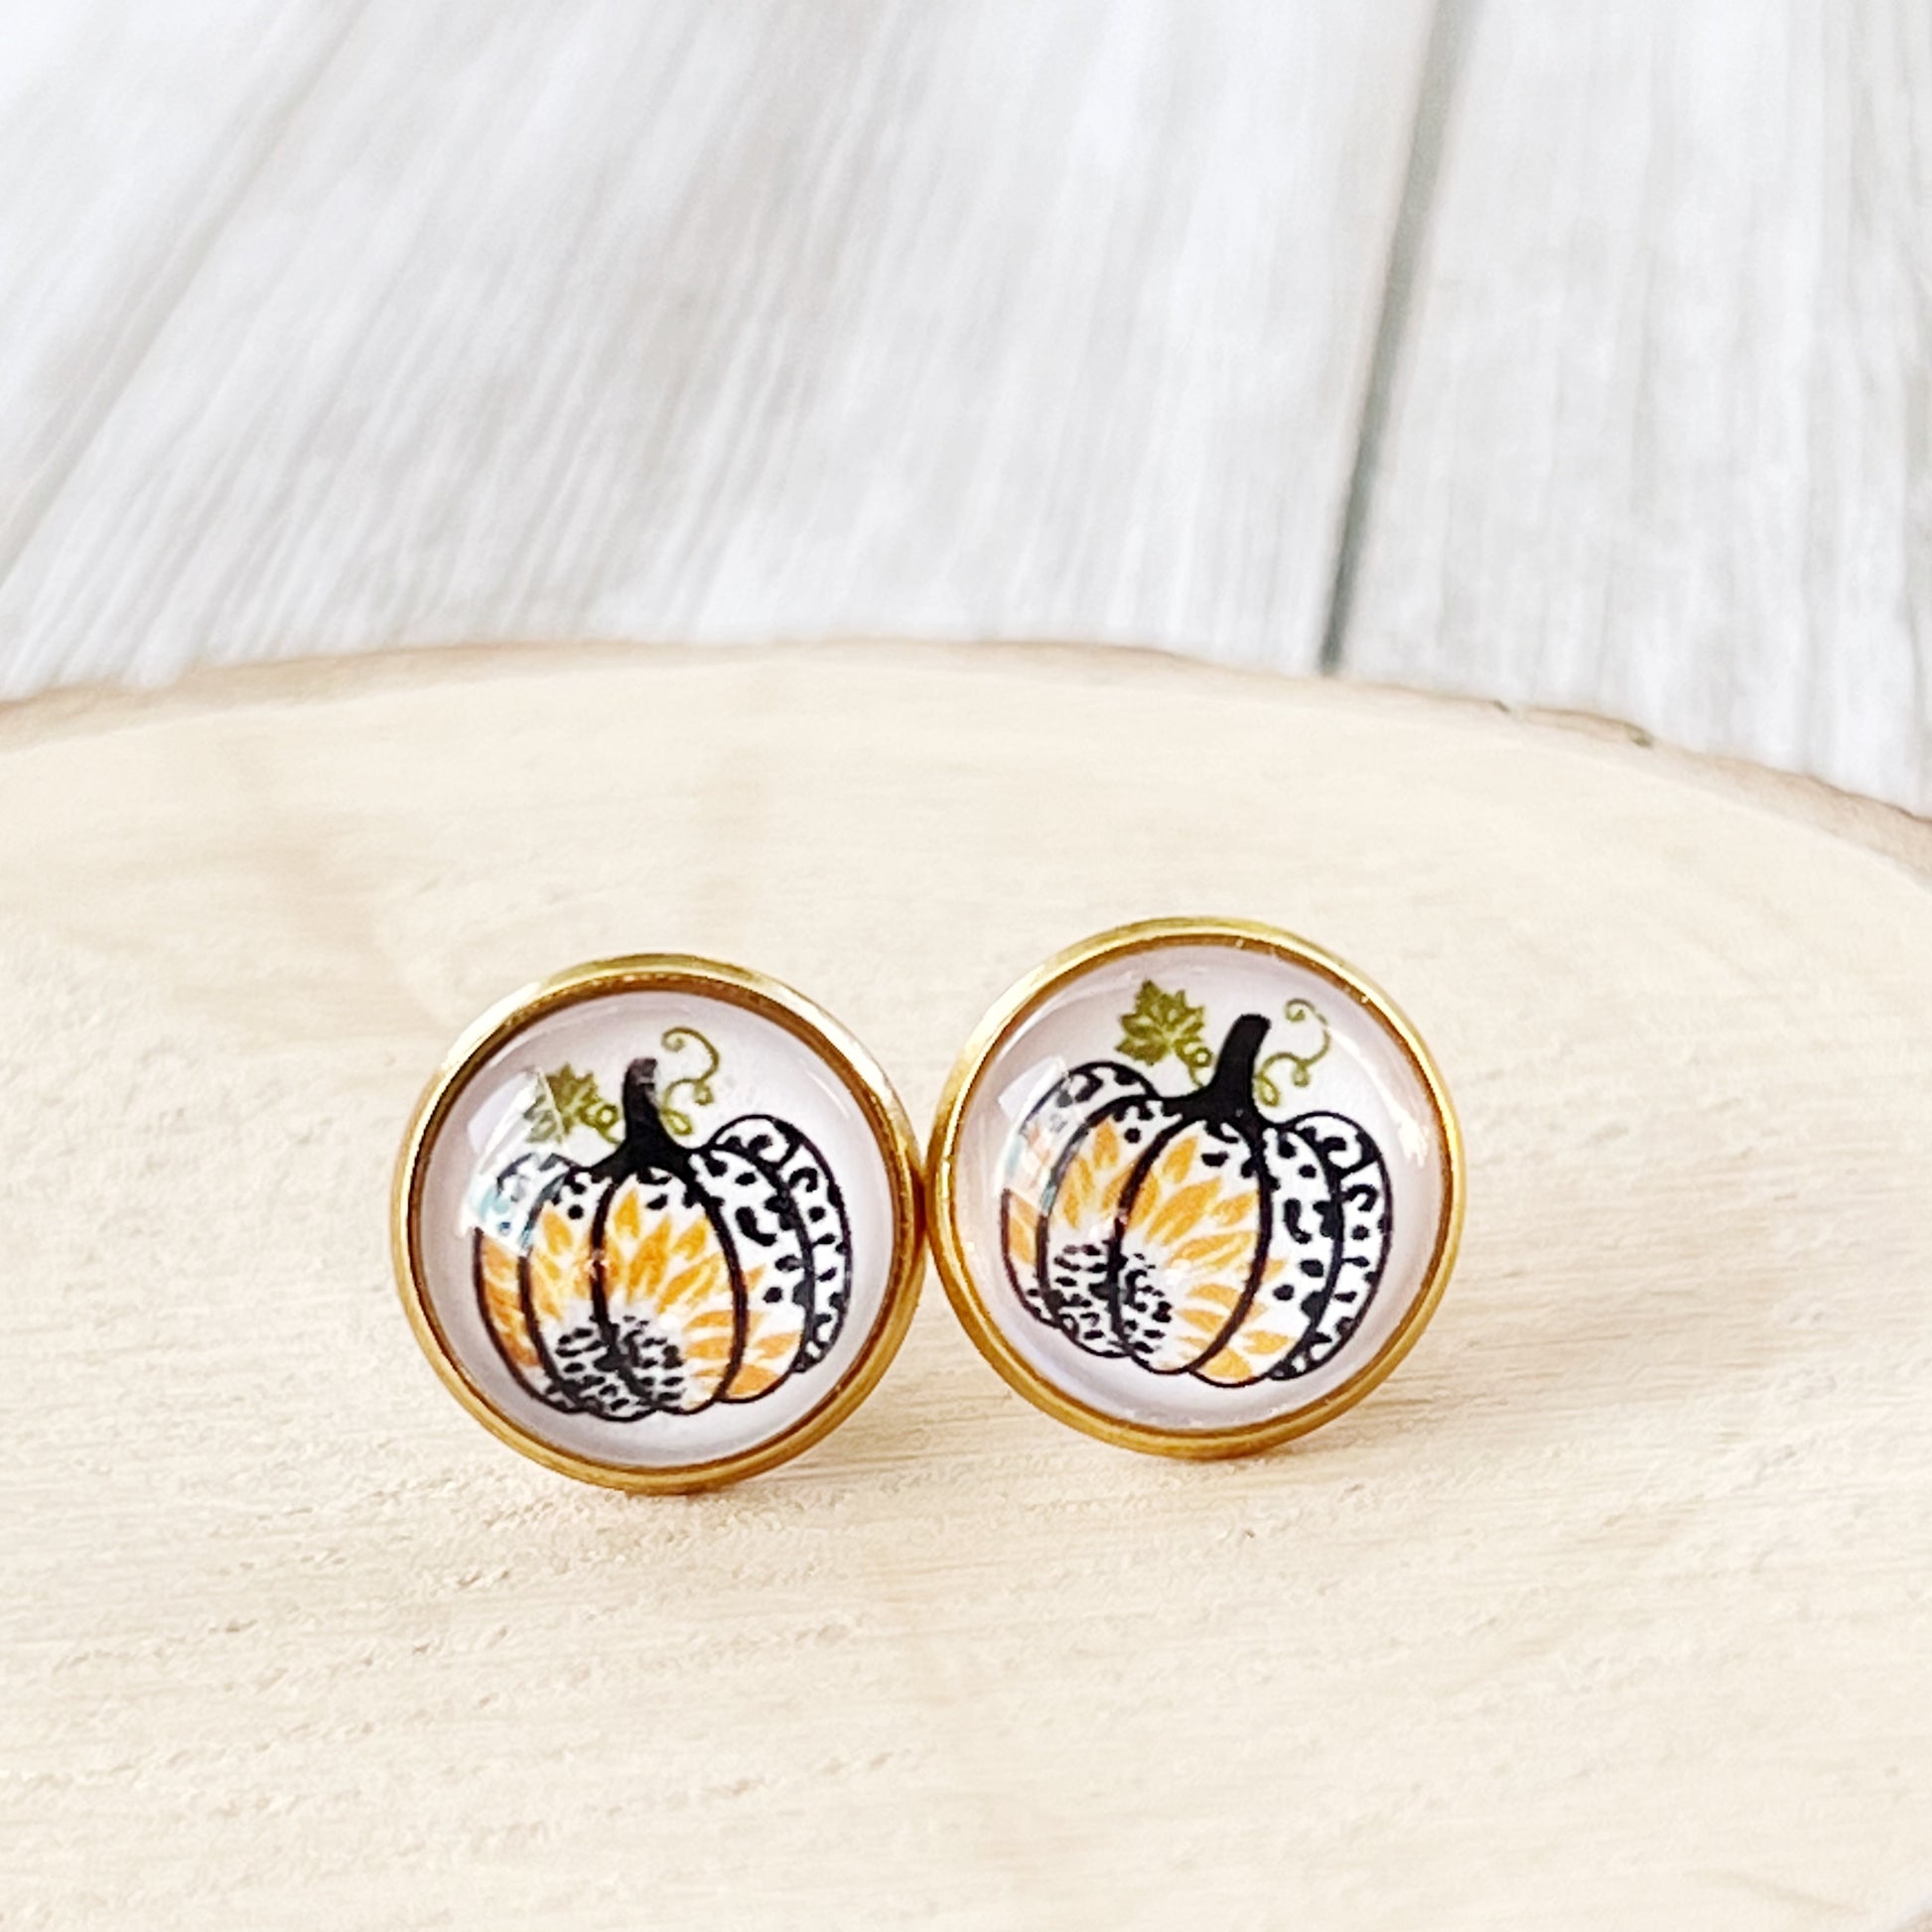 Pumpkin & Sunflower Gold Stud Earrings: Unique Autumn Accents for Your Style